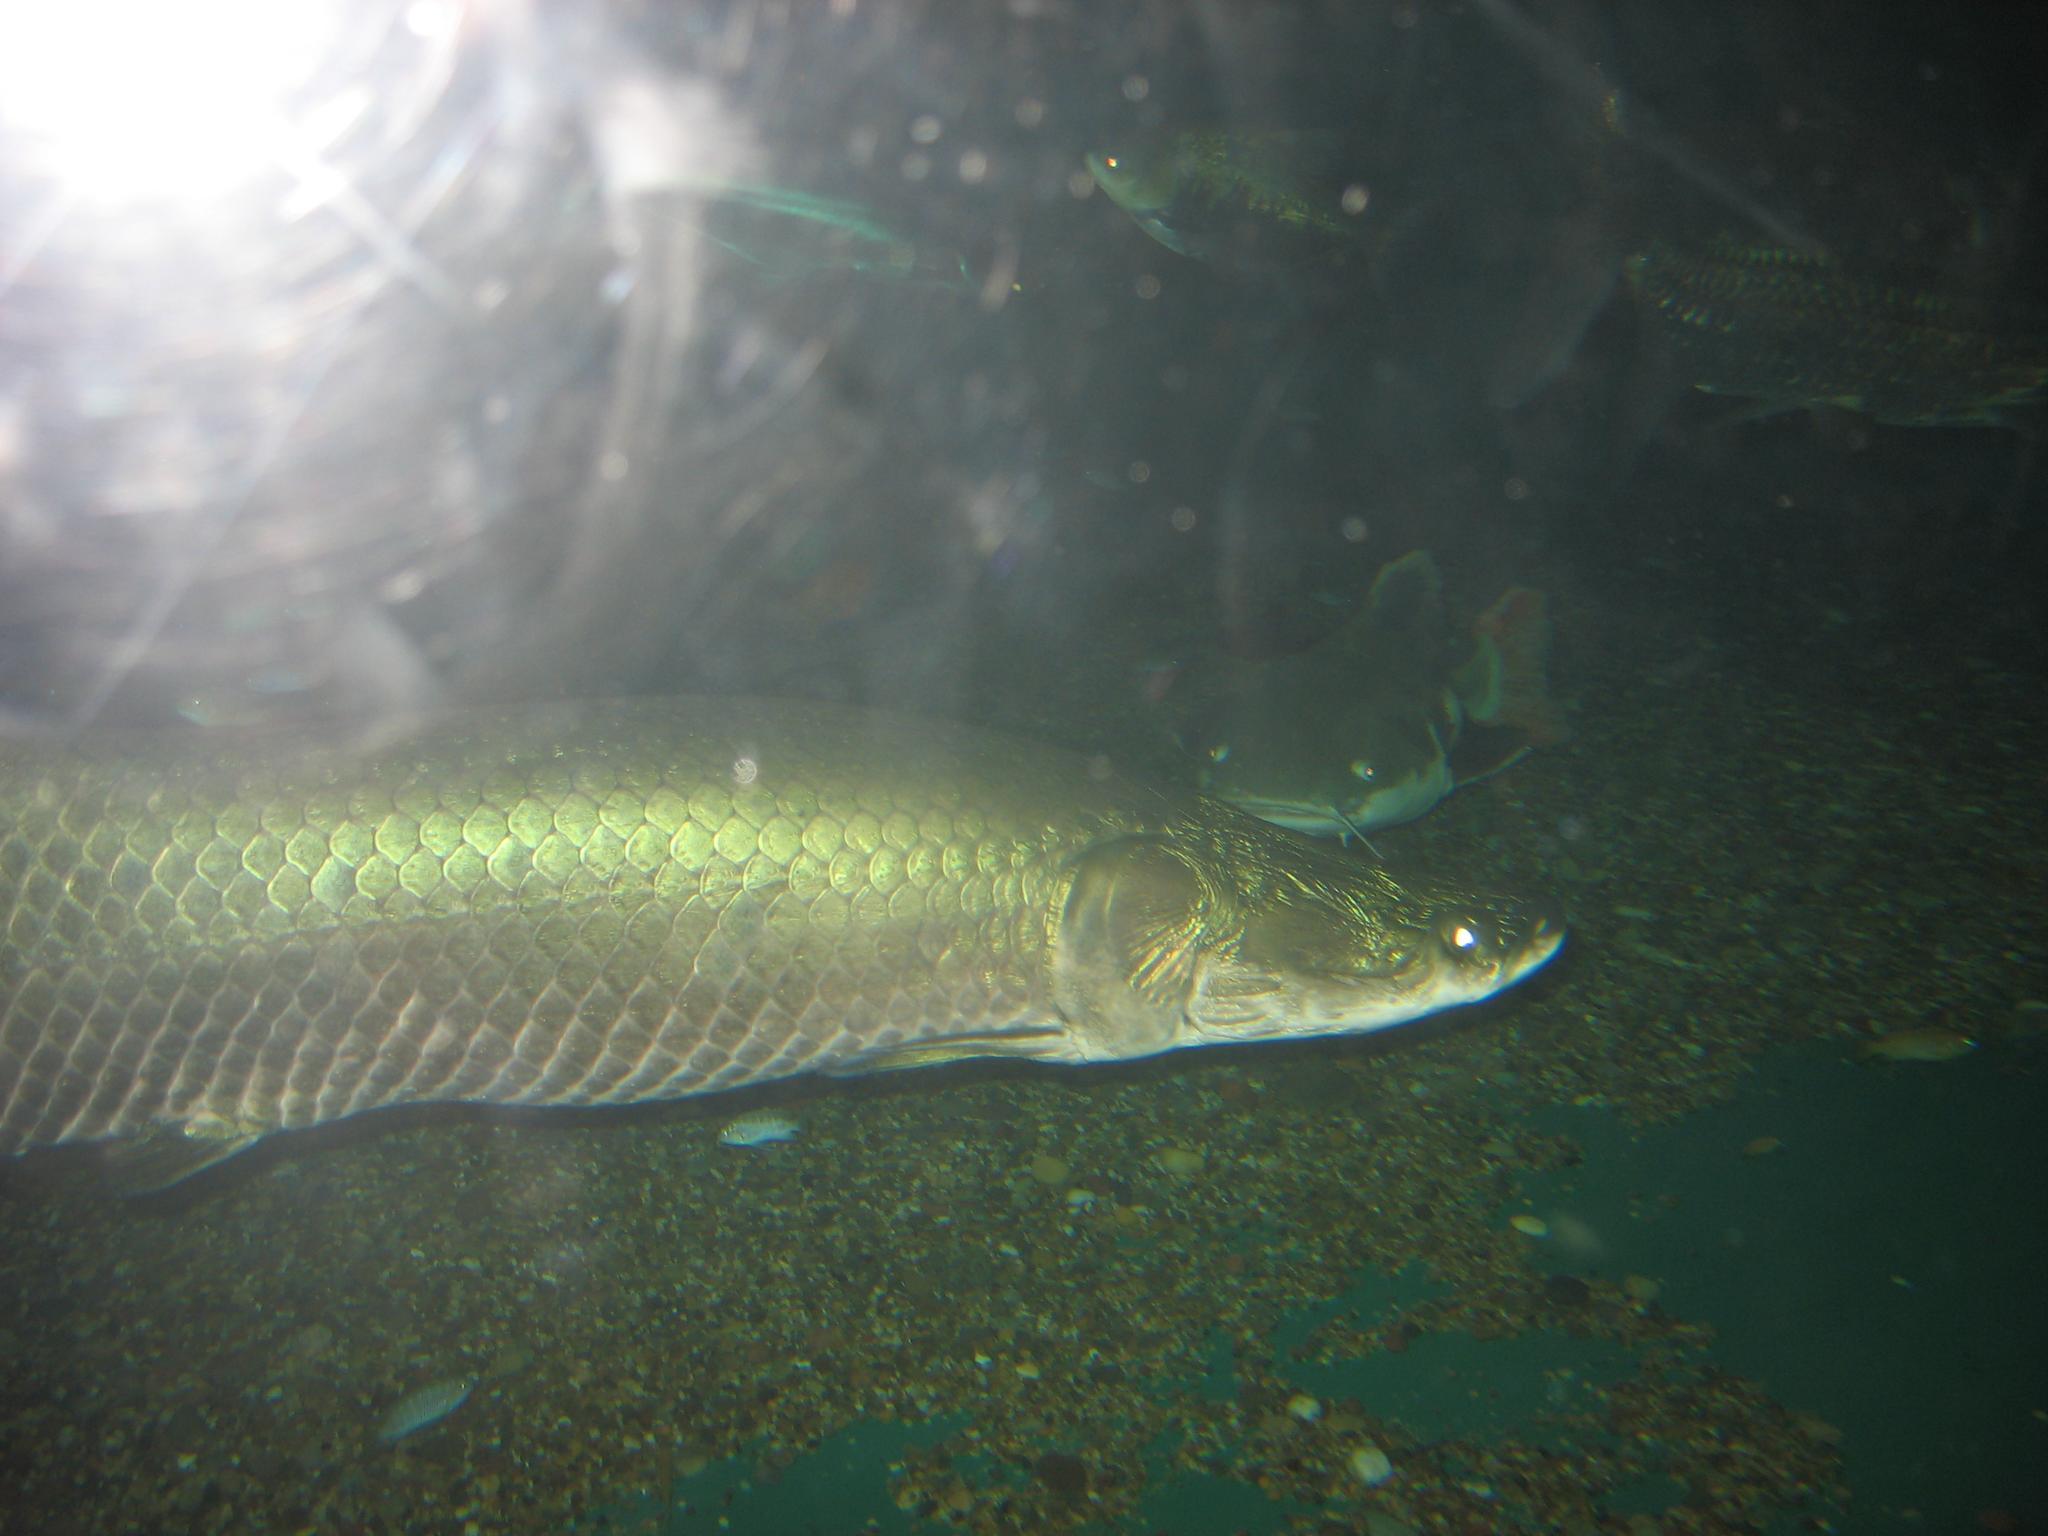 a large, green fish in the dark water